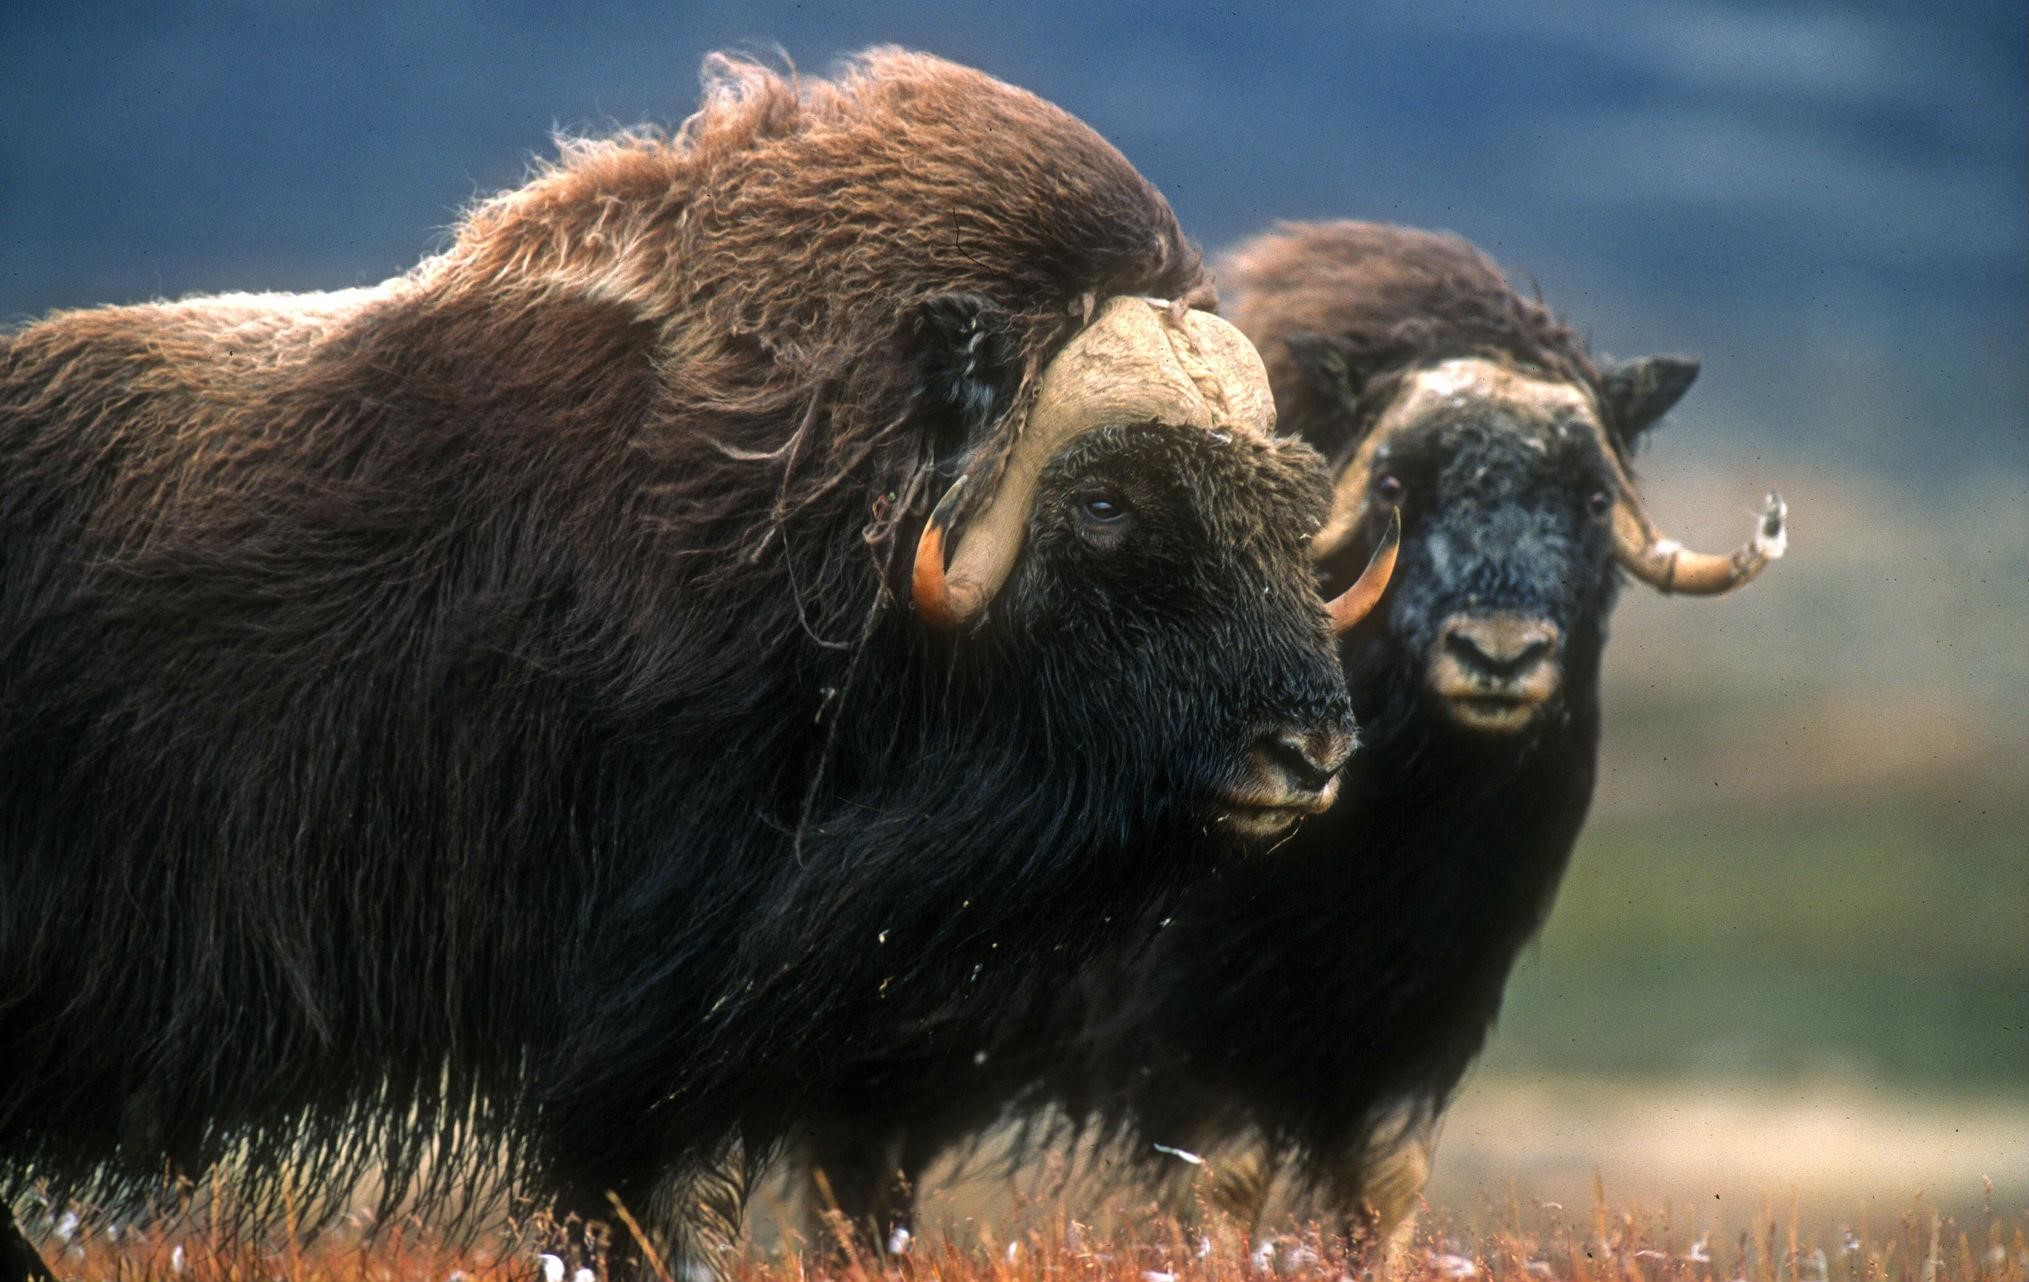 Photo: A pair of musk oxen in summer. Photo credit: Visit Greenland